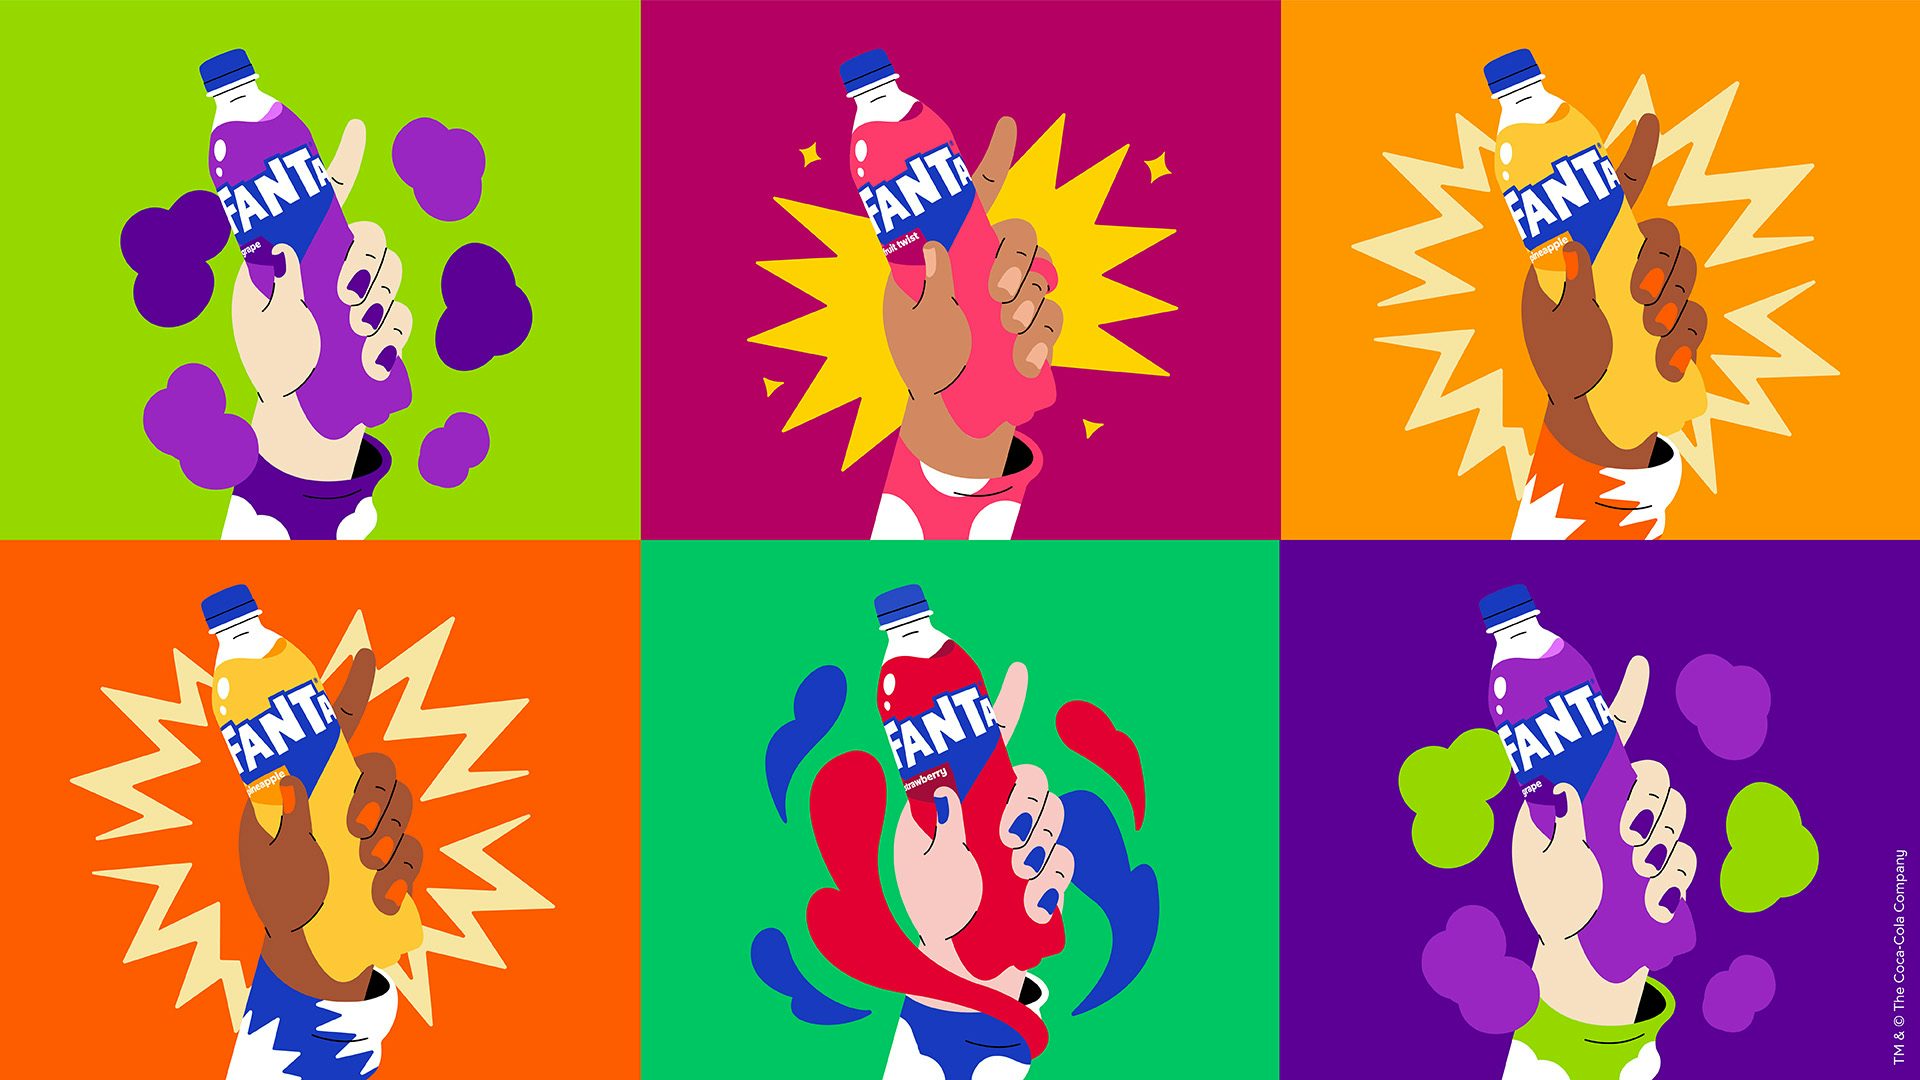 A set of six illustrations created for the new Fanta branding showing people's hands holding bottles of fanta in different colours